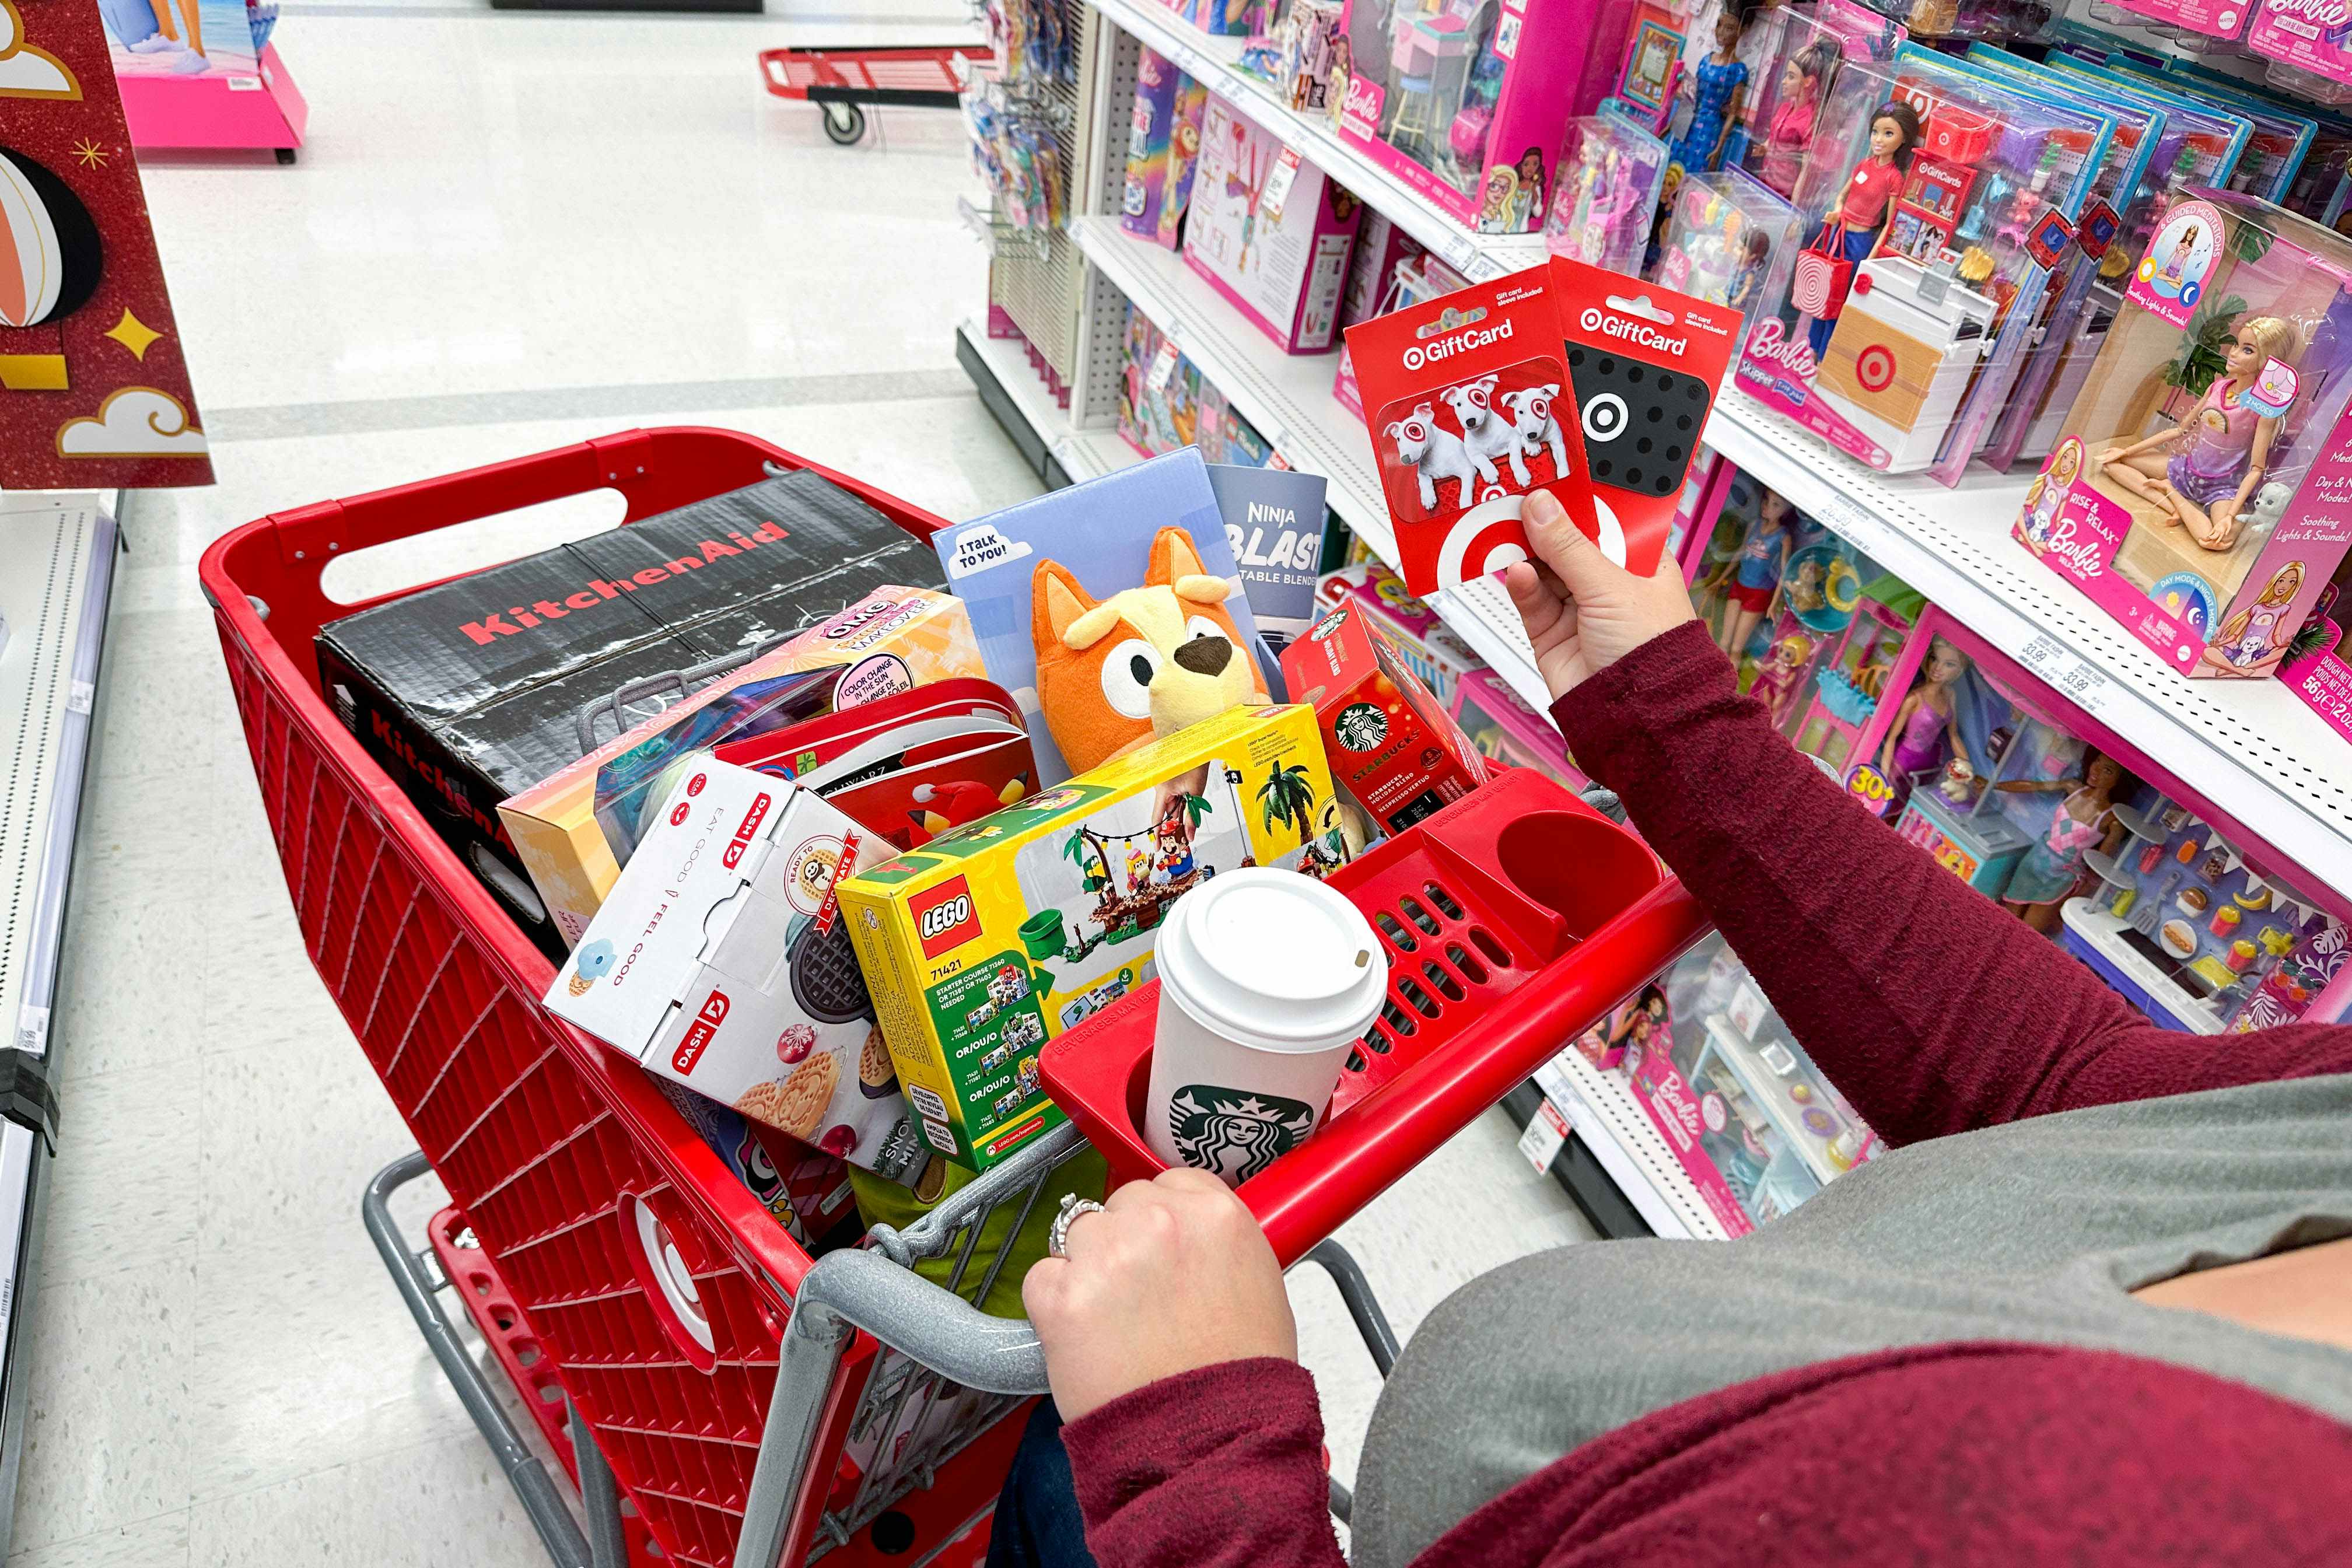 Target's Massive Annual Toy Clearance is Happening Now. Here's